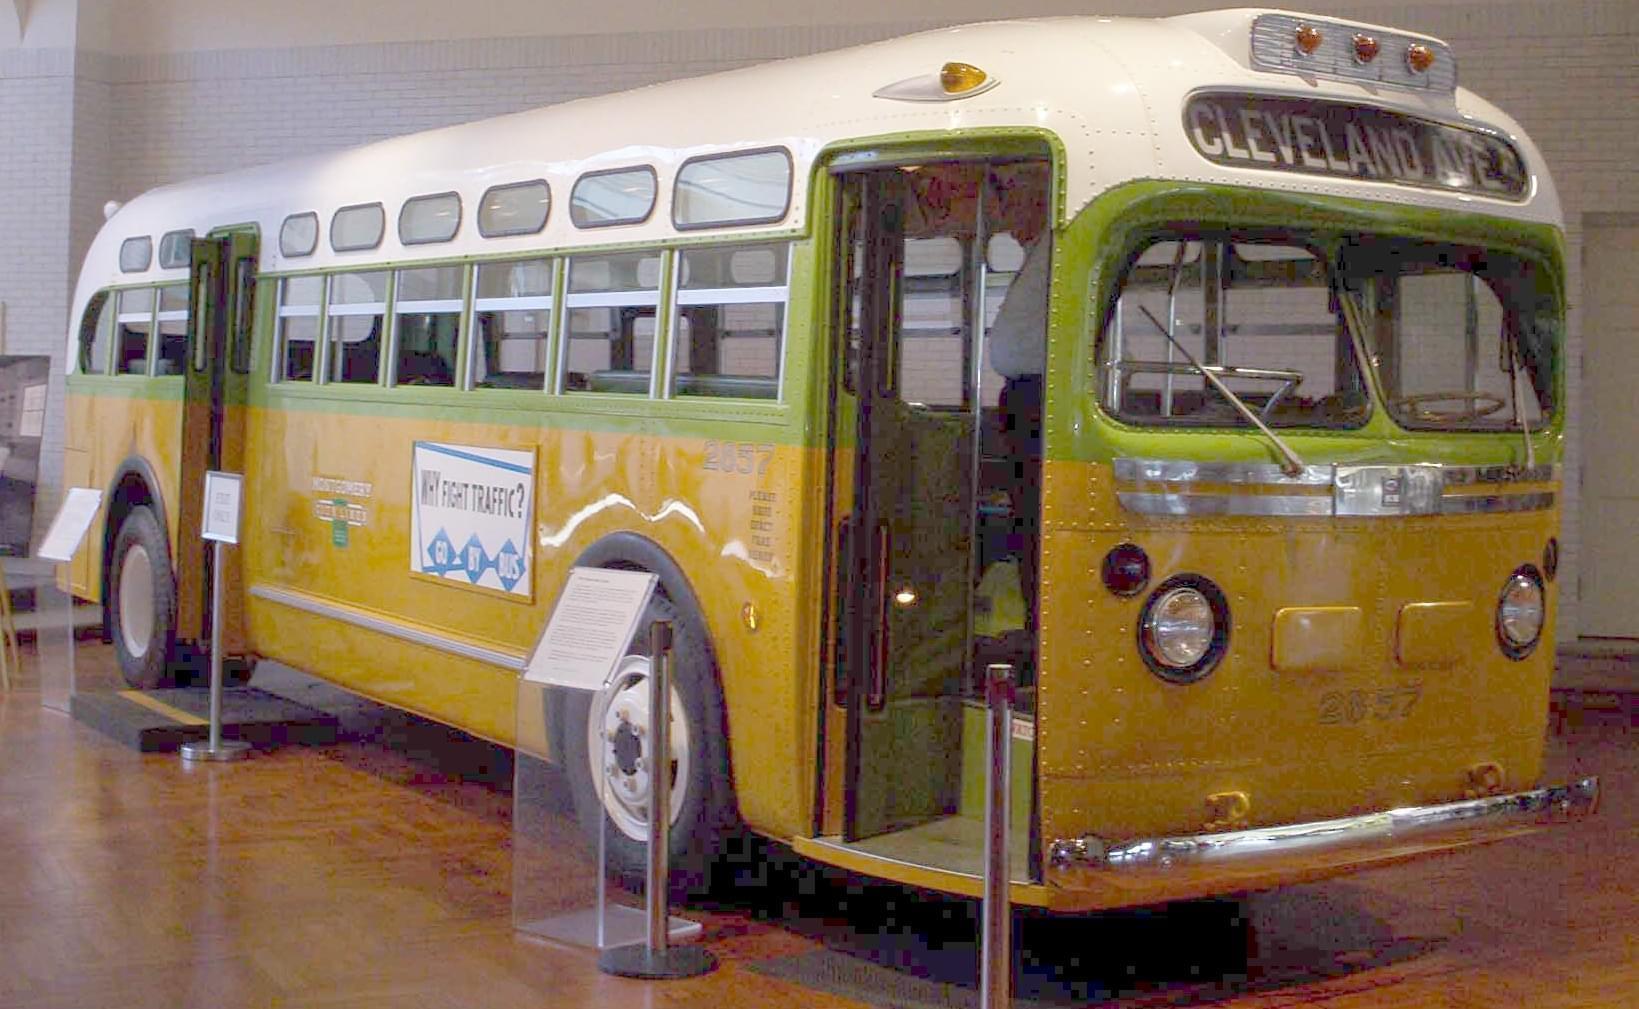 The bus on which Rosa Parks refused to give up her seat to a white passenger, on exhibit at the Henry Ford Museum.